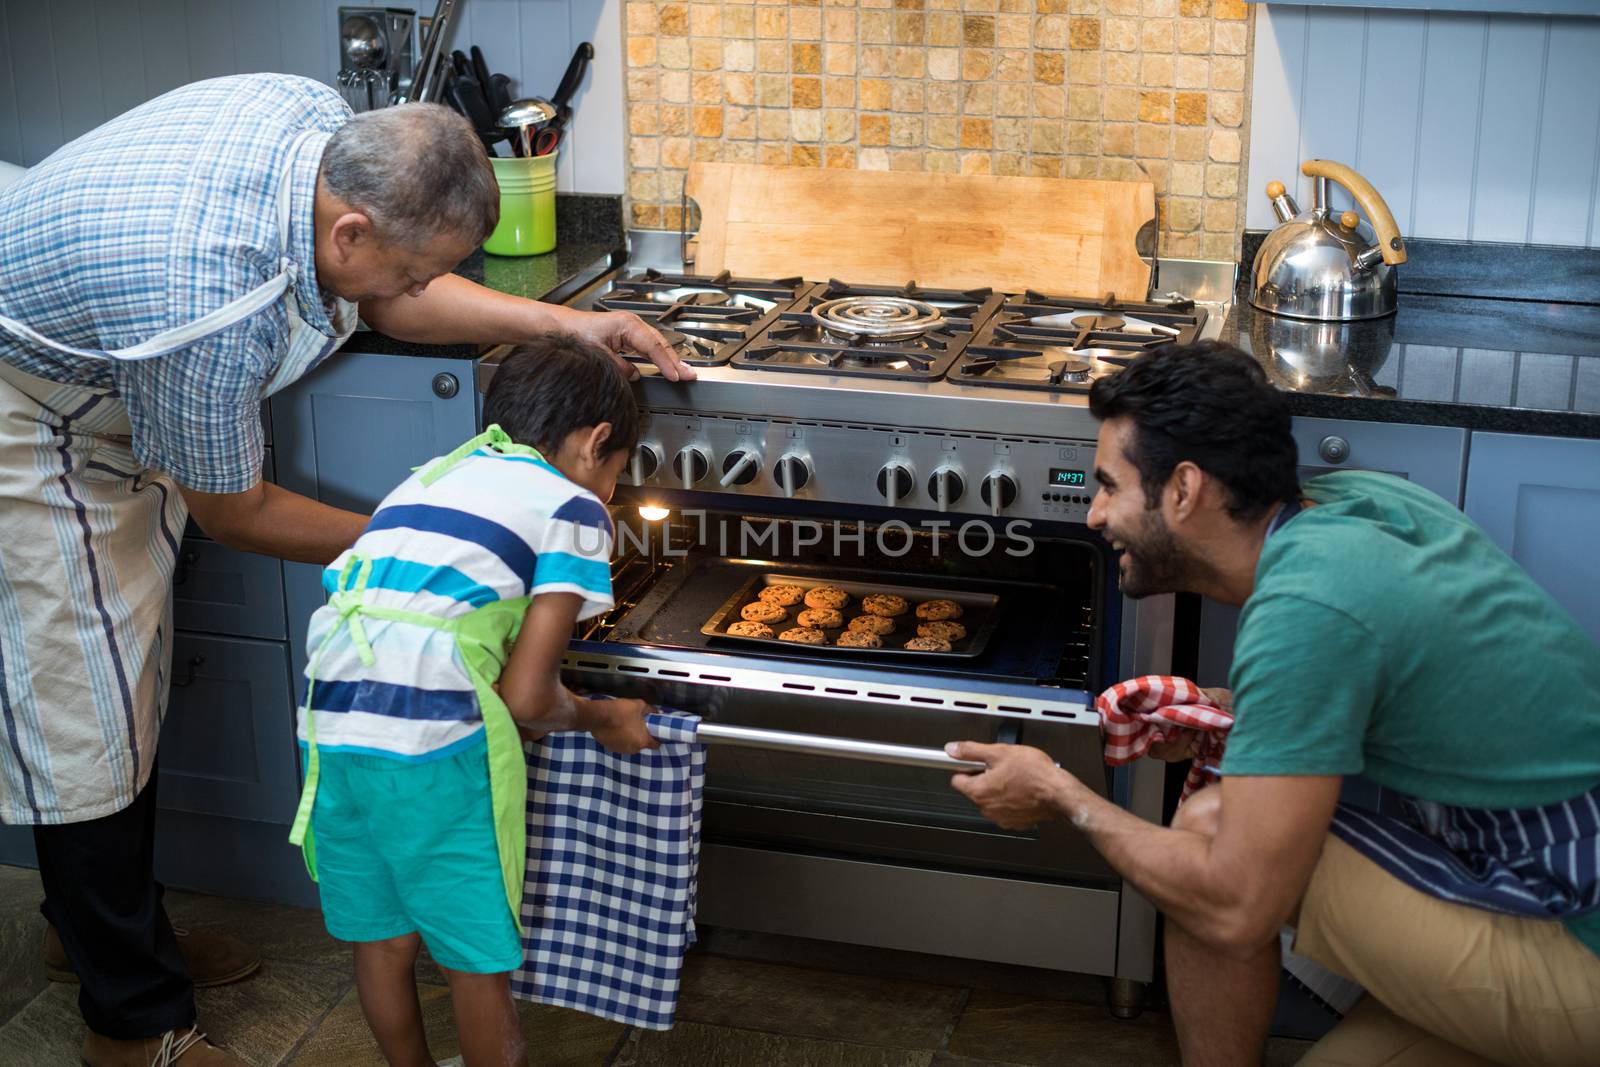 Family keeping cookies in oven at home